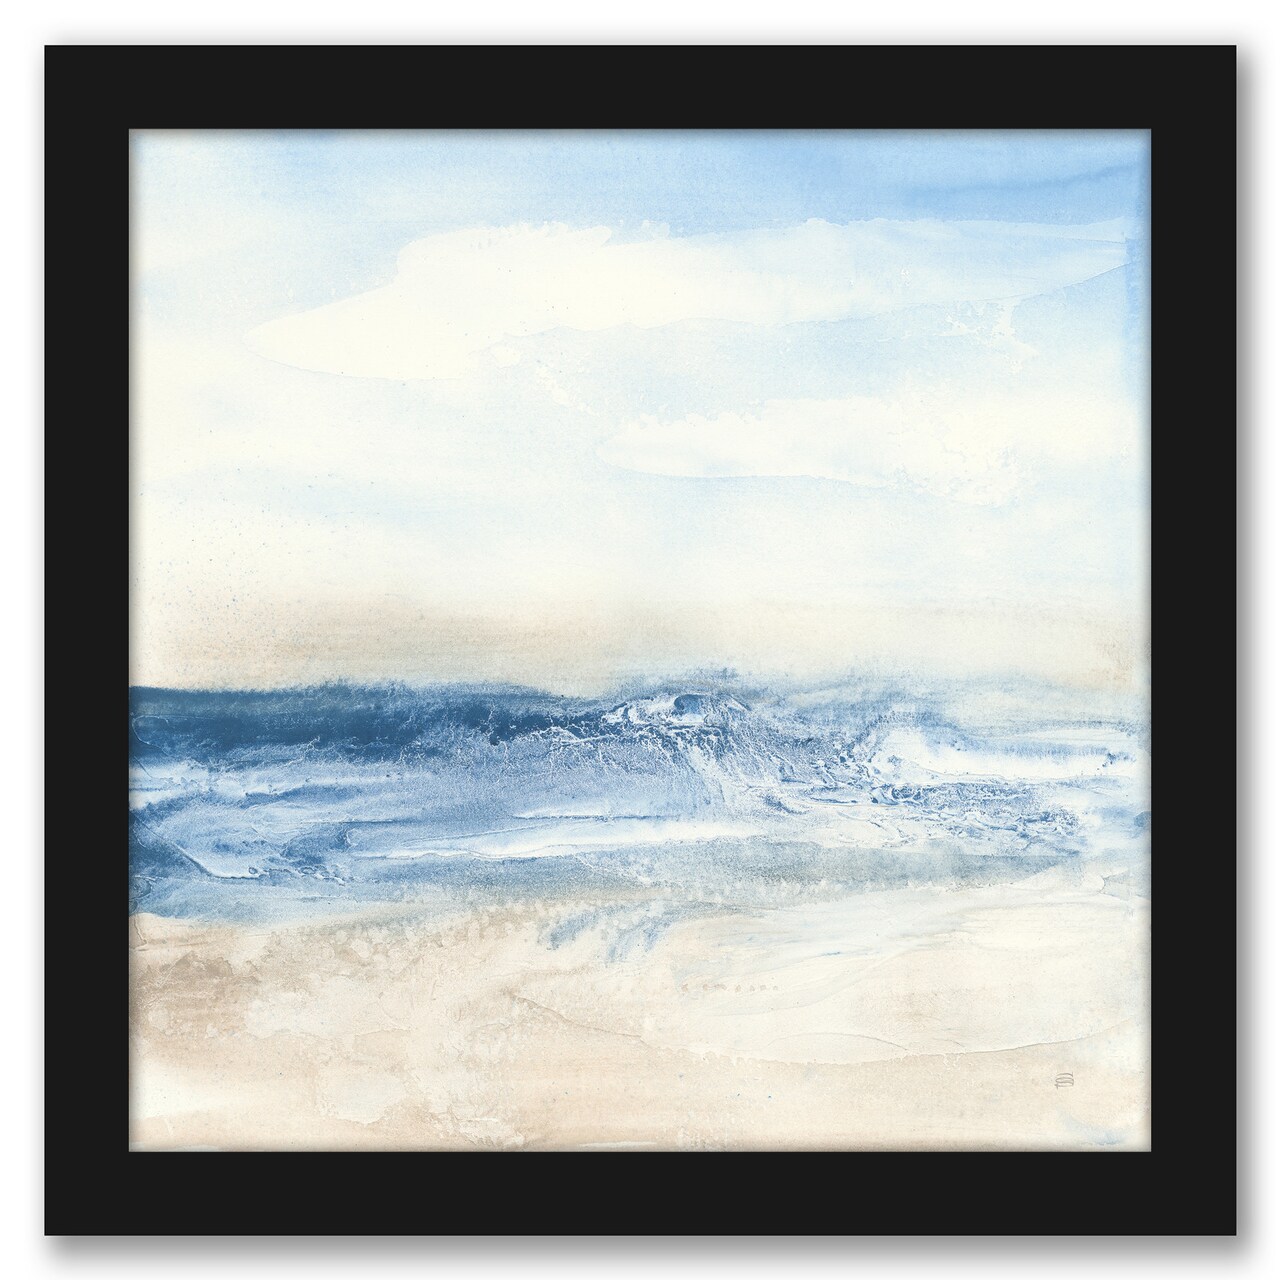 Surf and Sand Wall Art by Chris Paschke Black Framed Print 11x11 - Americanflat